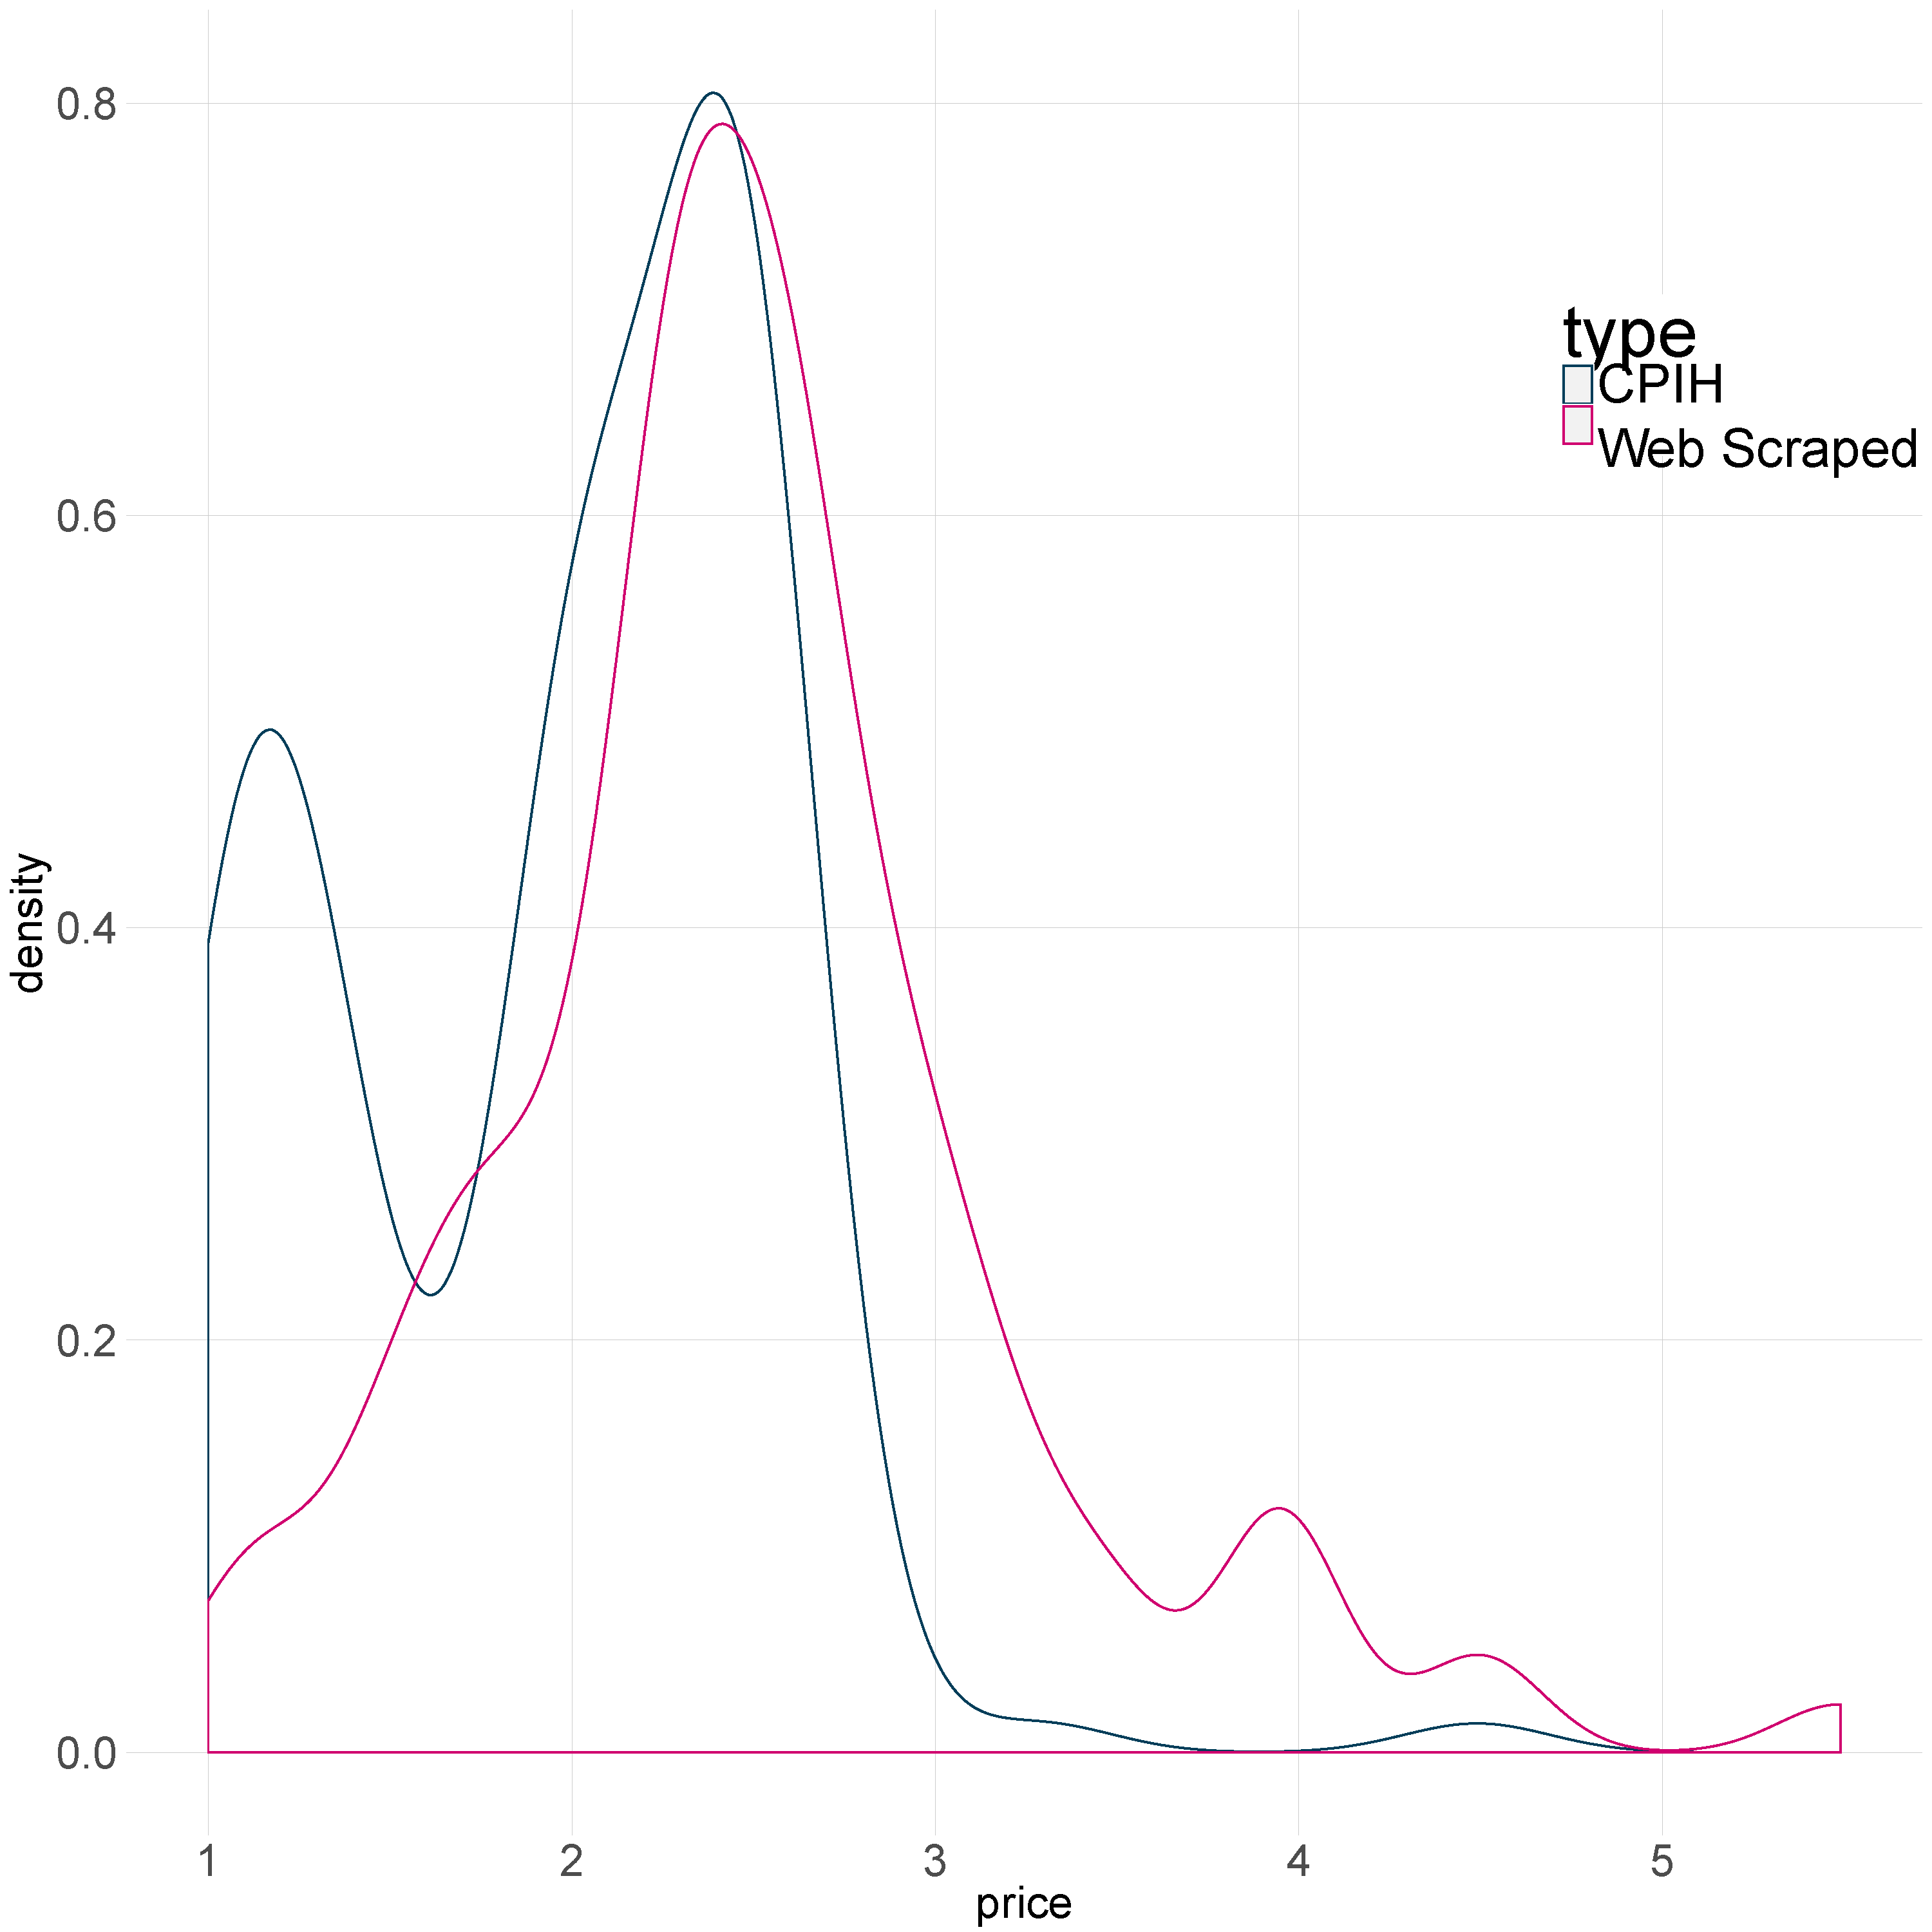 The Distributions of Tea bags, both in the CPIH collection and in the web scraped, both show three modes. 